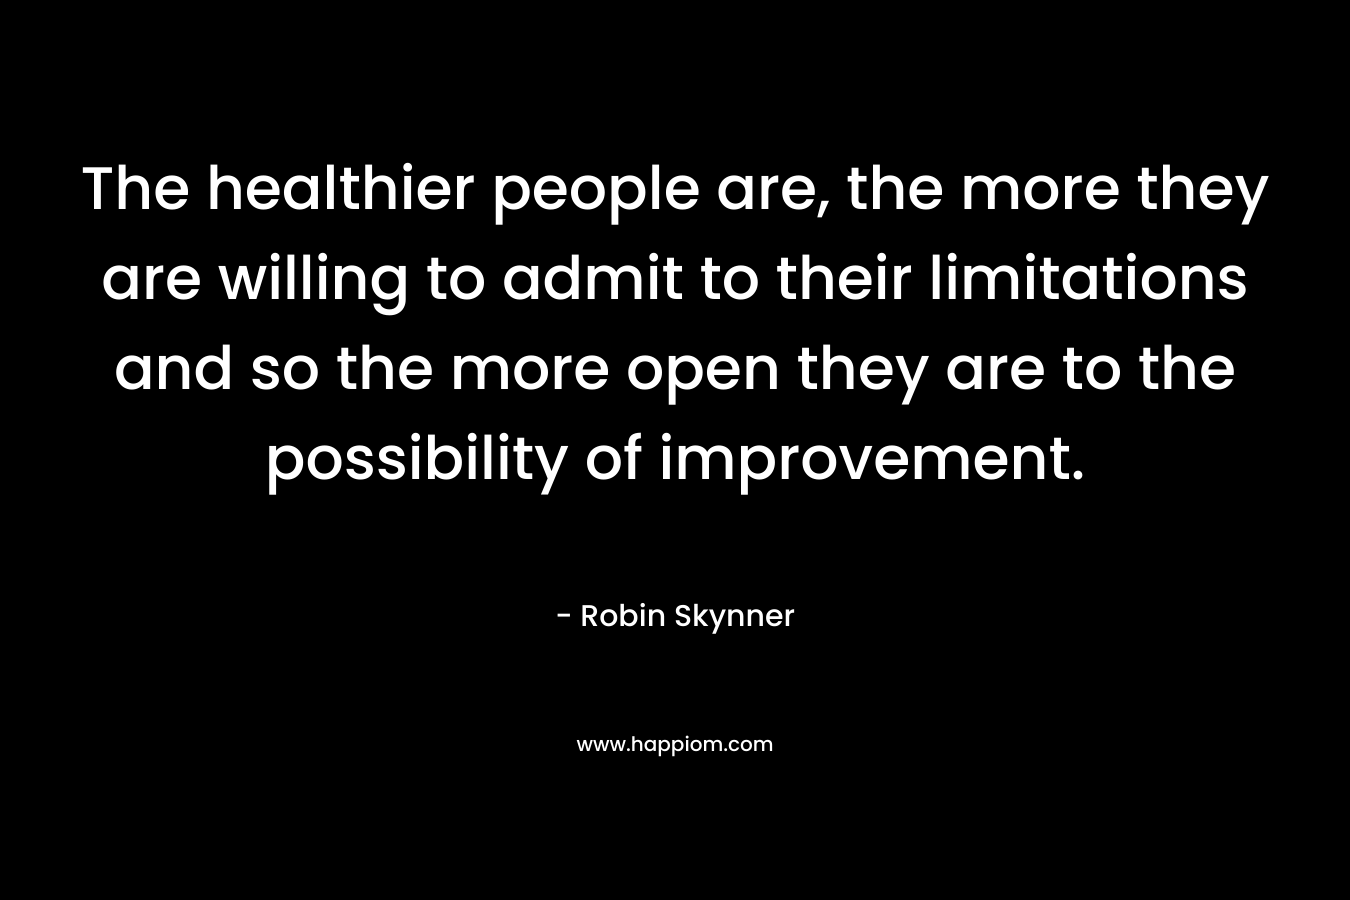 The healthier people are, the more they are willing to admit to their limitations and so the more open they are to the possibility of improvement. – Robin Skynner